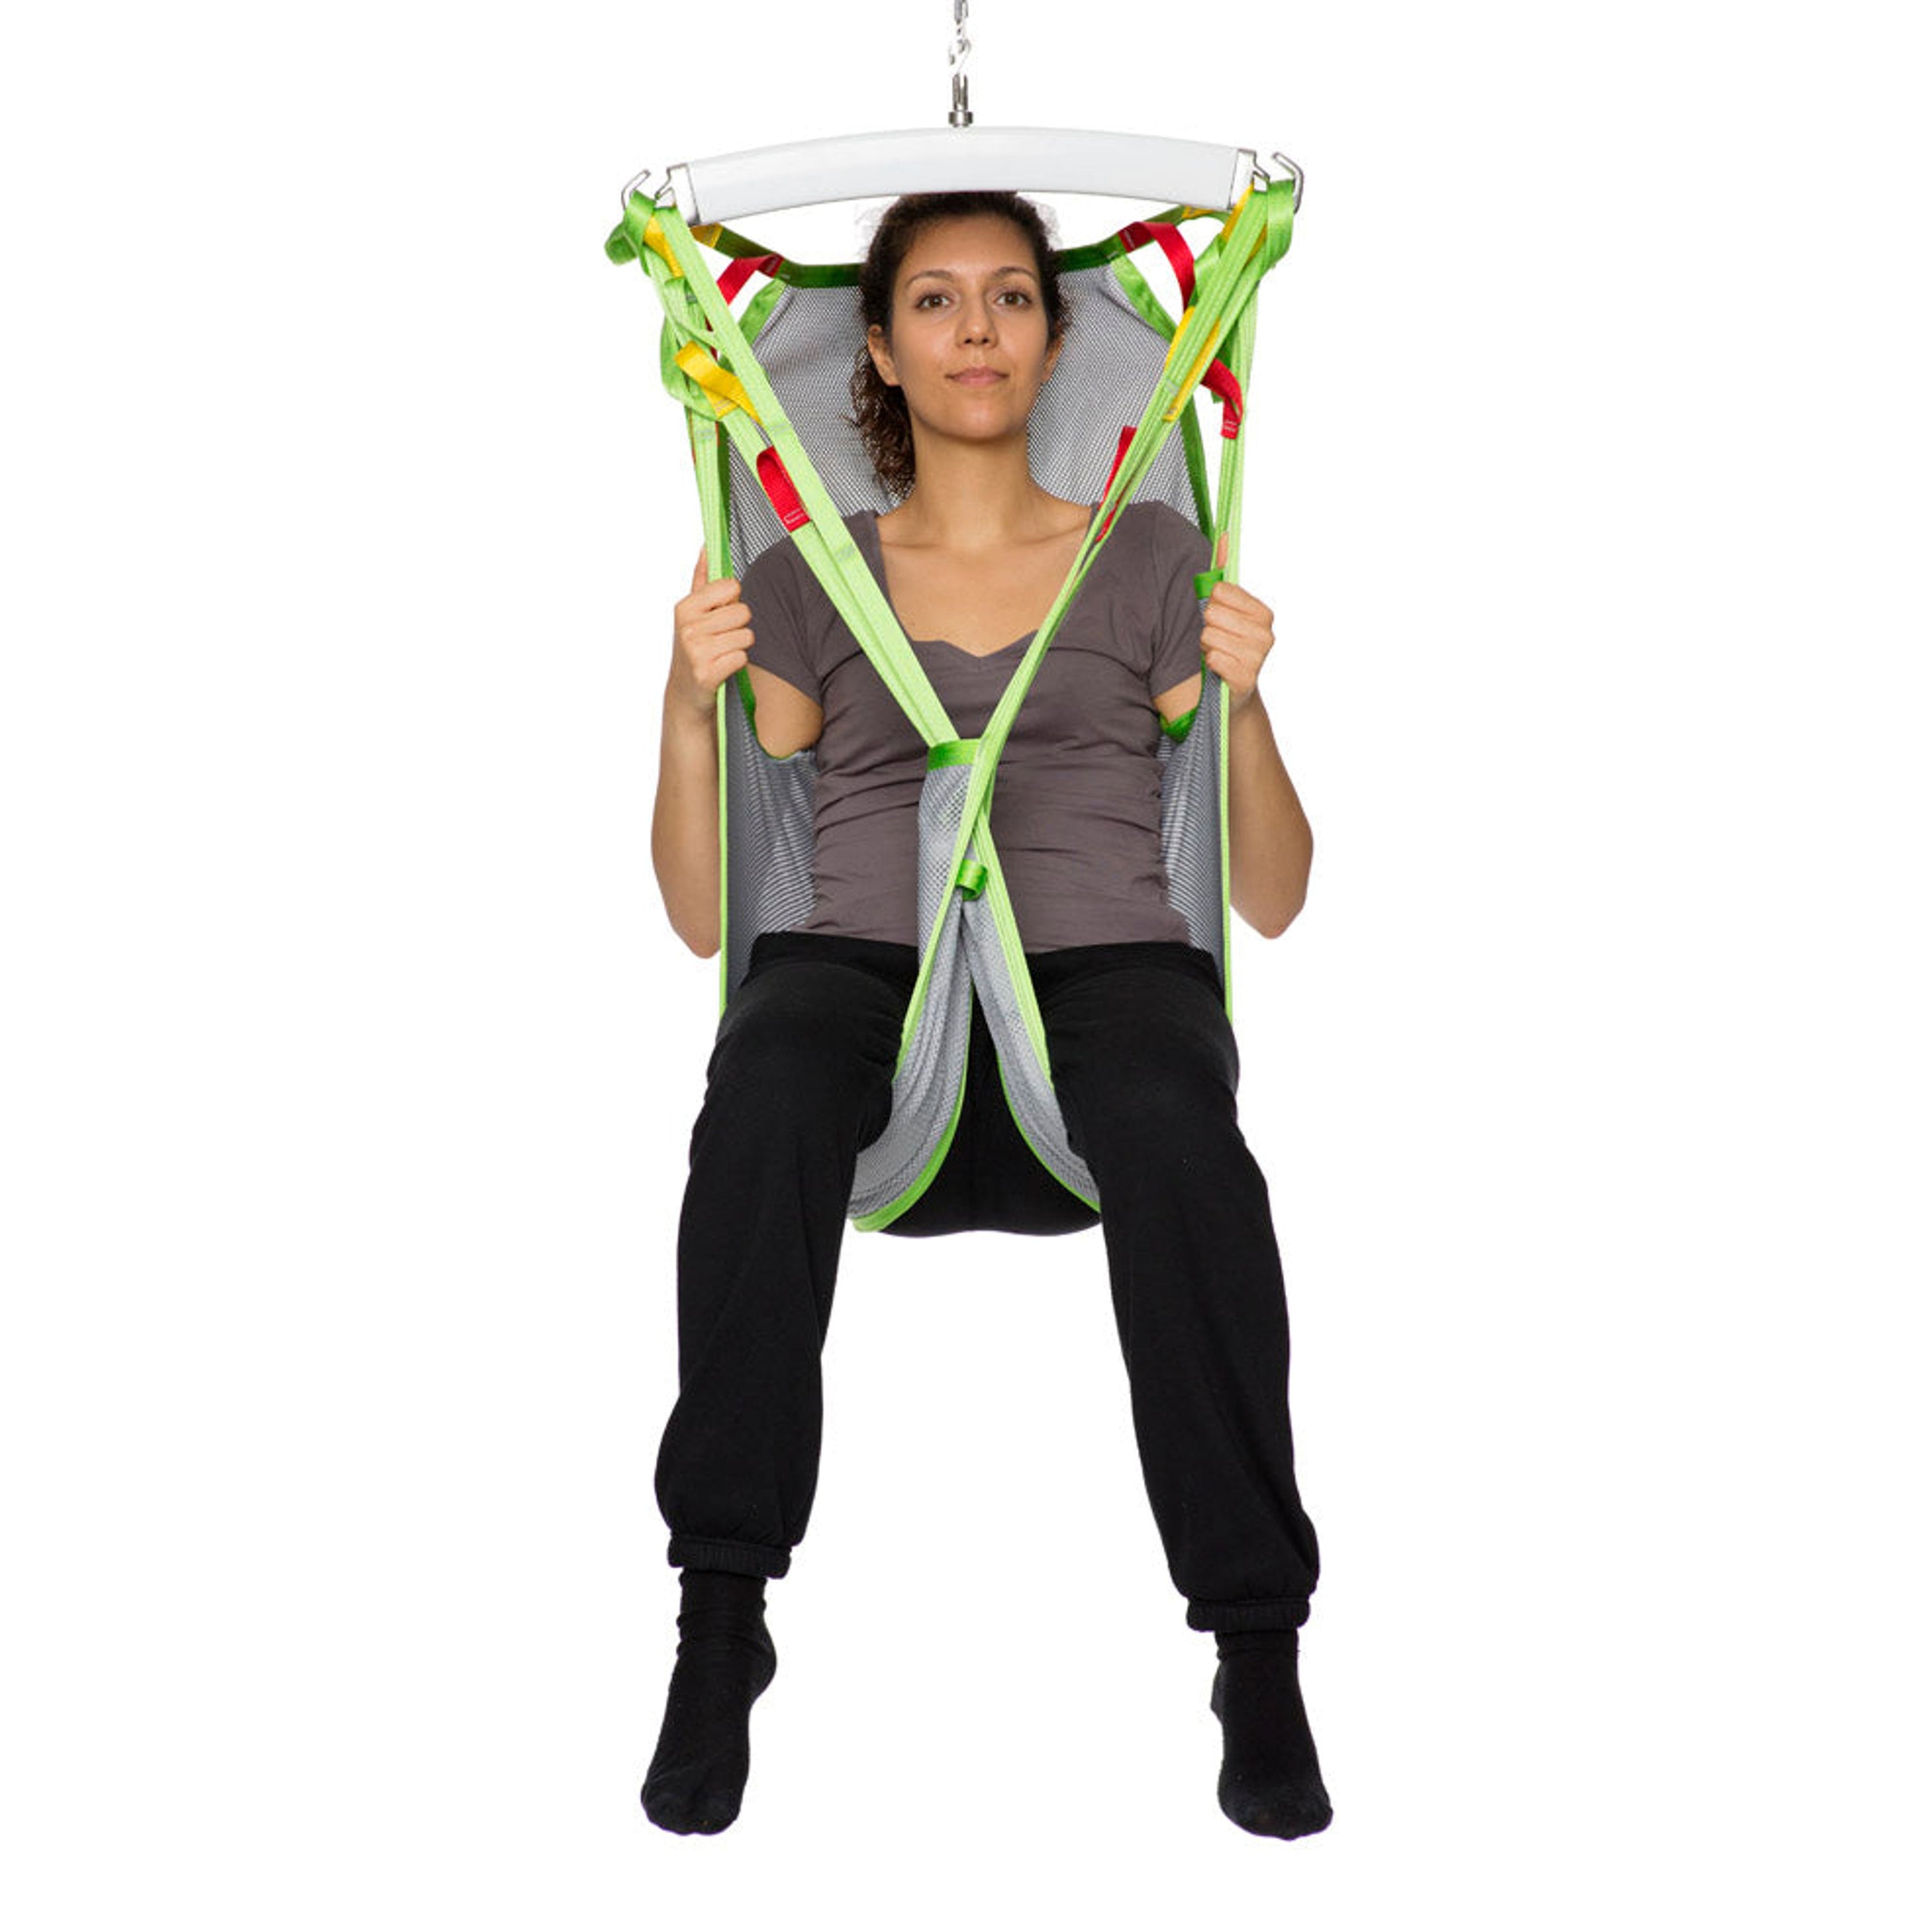 Human Care Silhouette Sling